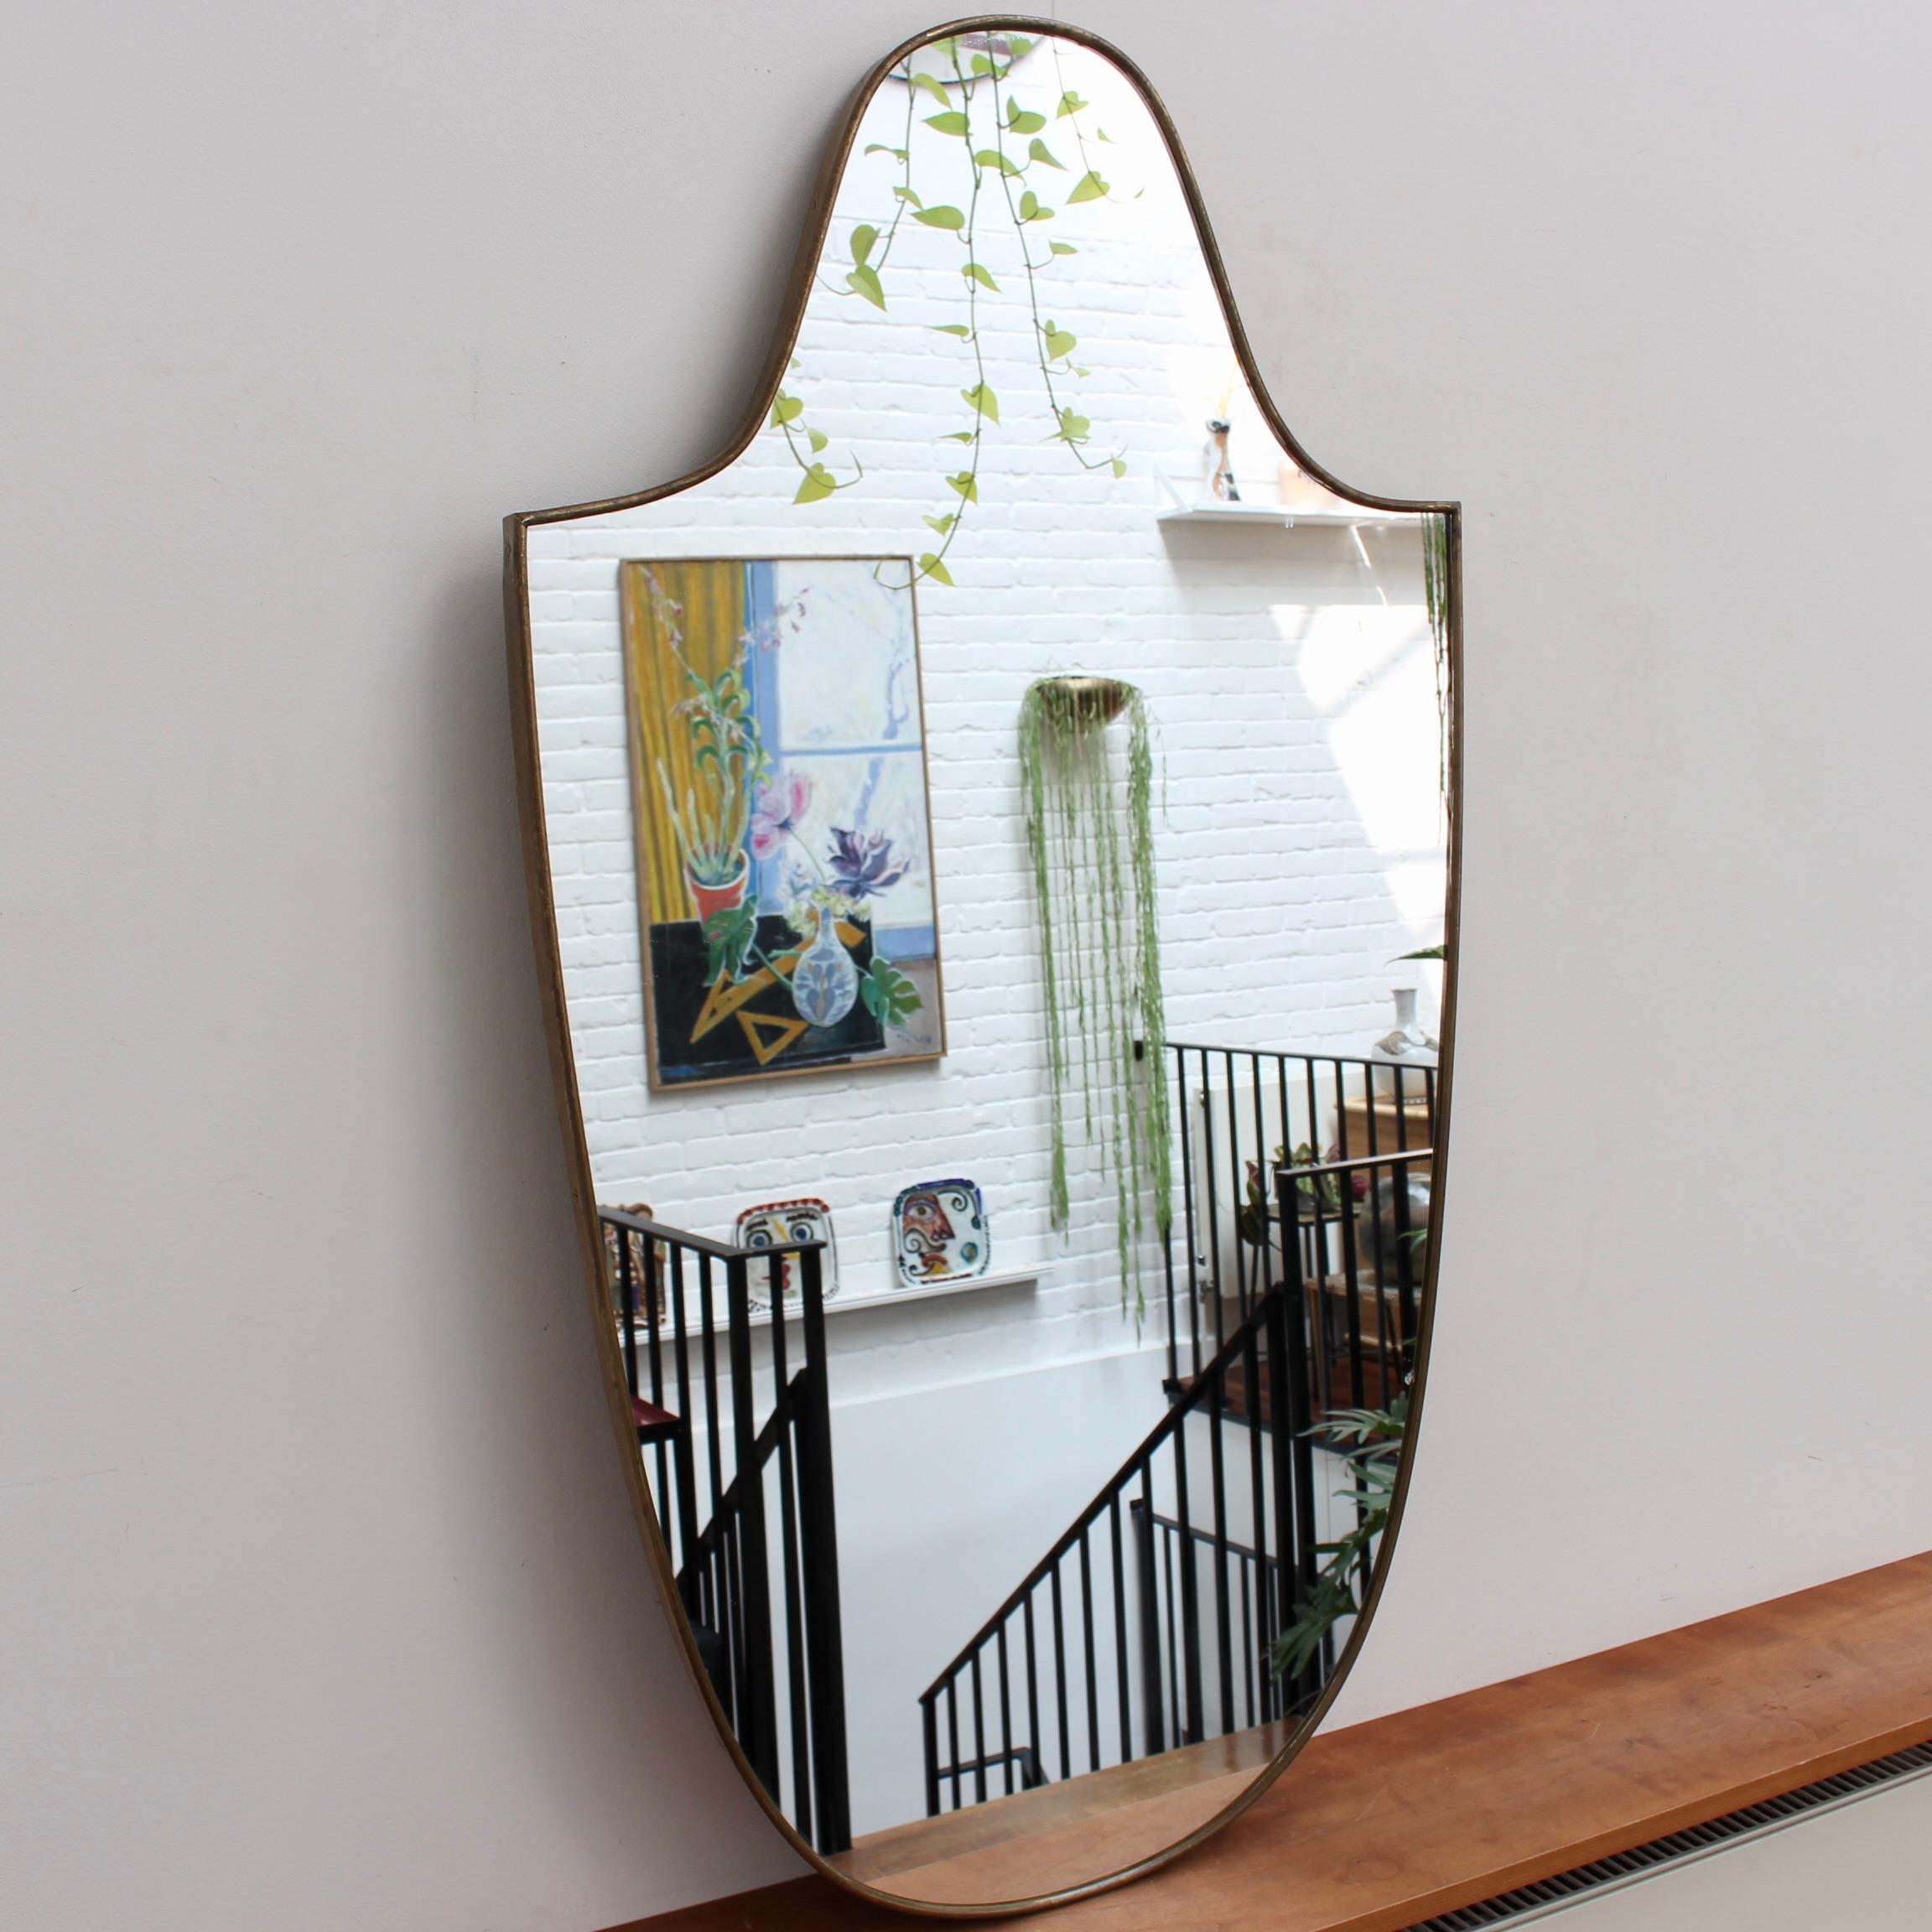 Mid-century Italian wall mirror with brass frame (circa 1950s). The mirror is classically-shaped and distinctive in a Modern style. It is in good overall condition with just a slight chip in the glass as seen in the photos accompanying the listing.